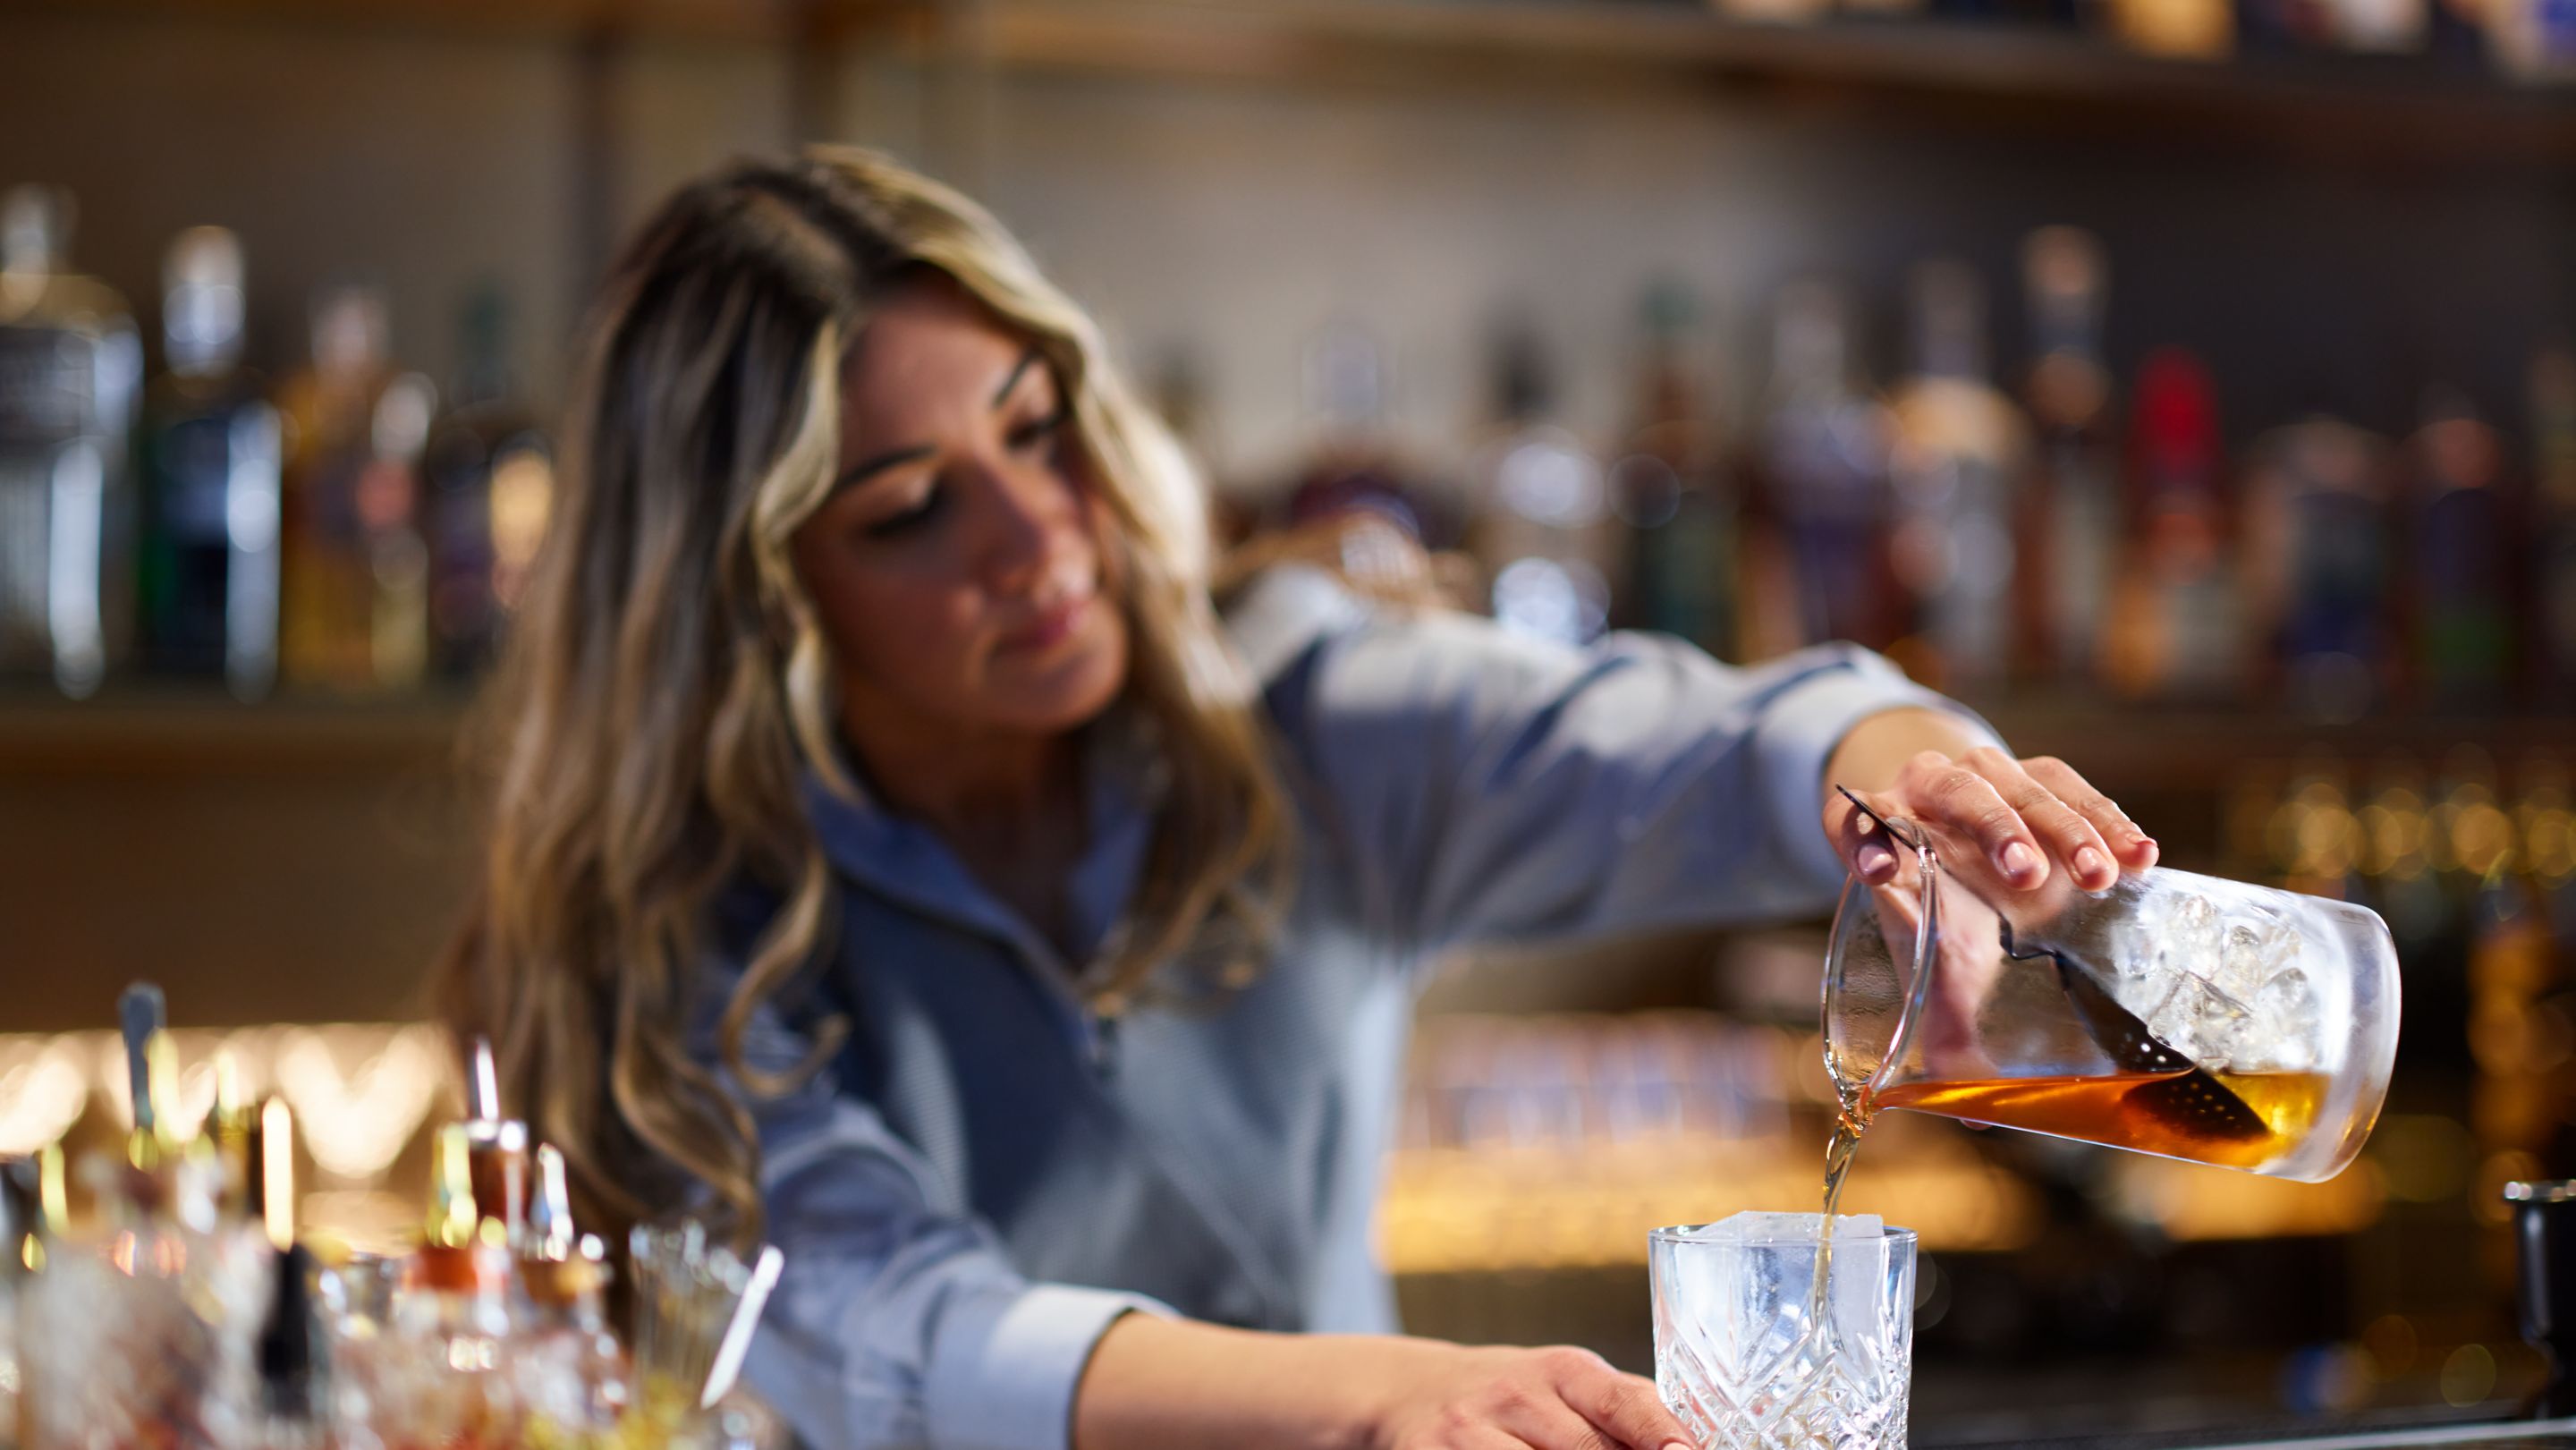 A bartender pouring a drink behind a bar.